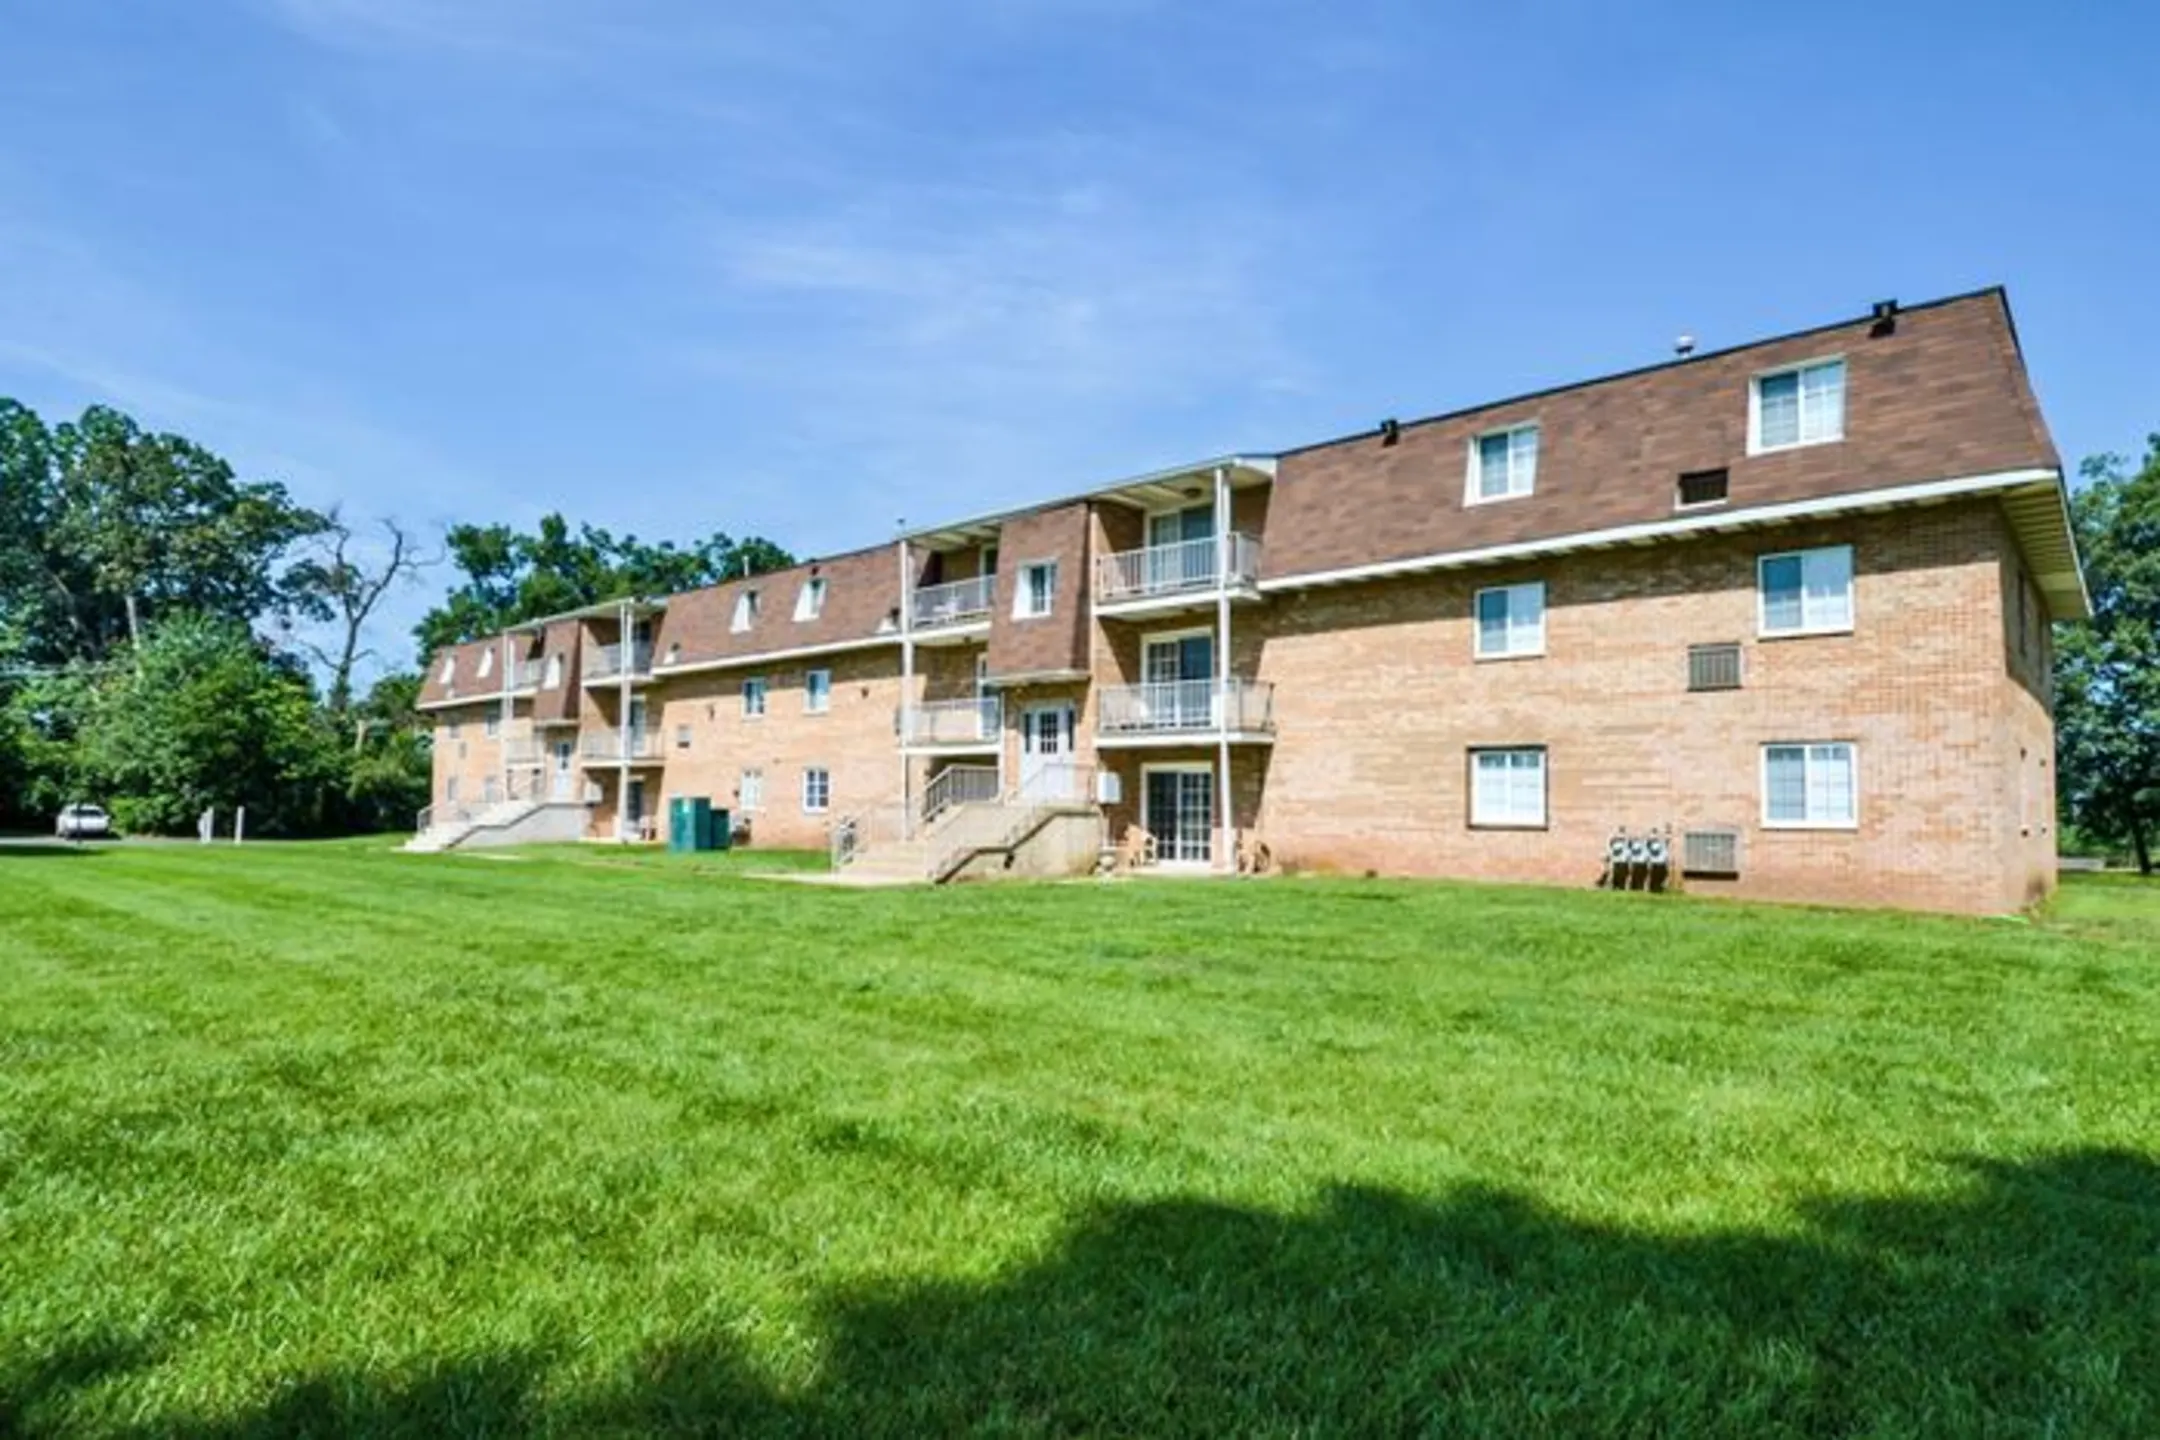 Building - Main Street Apartment Homes - Lansdale, PA